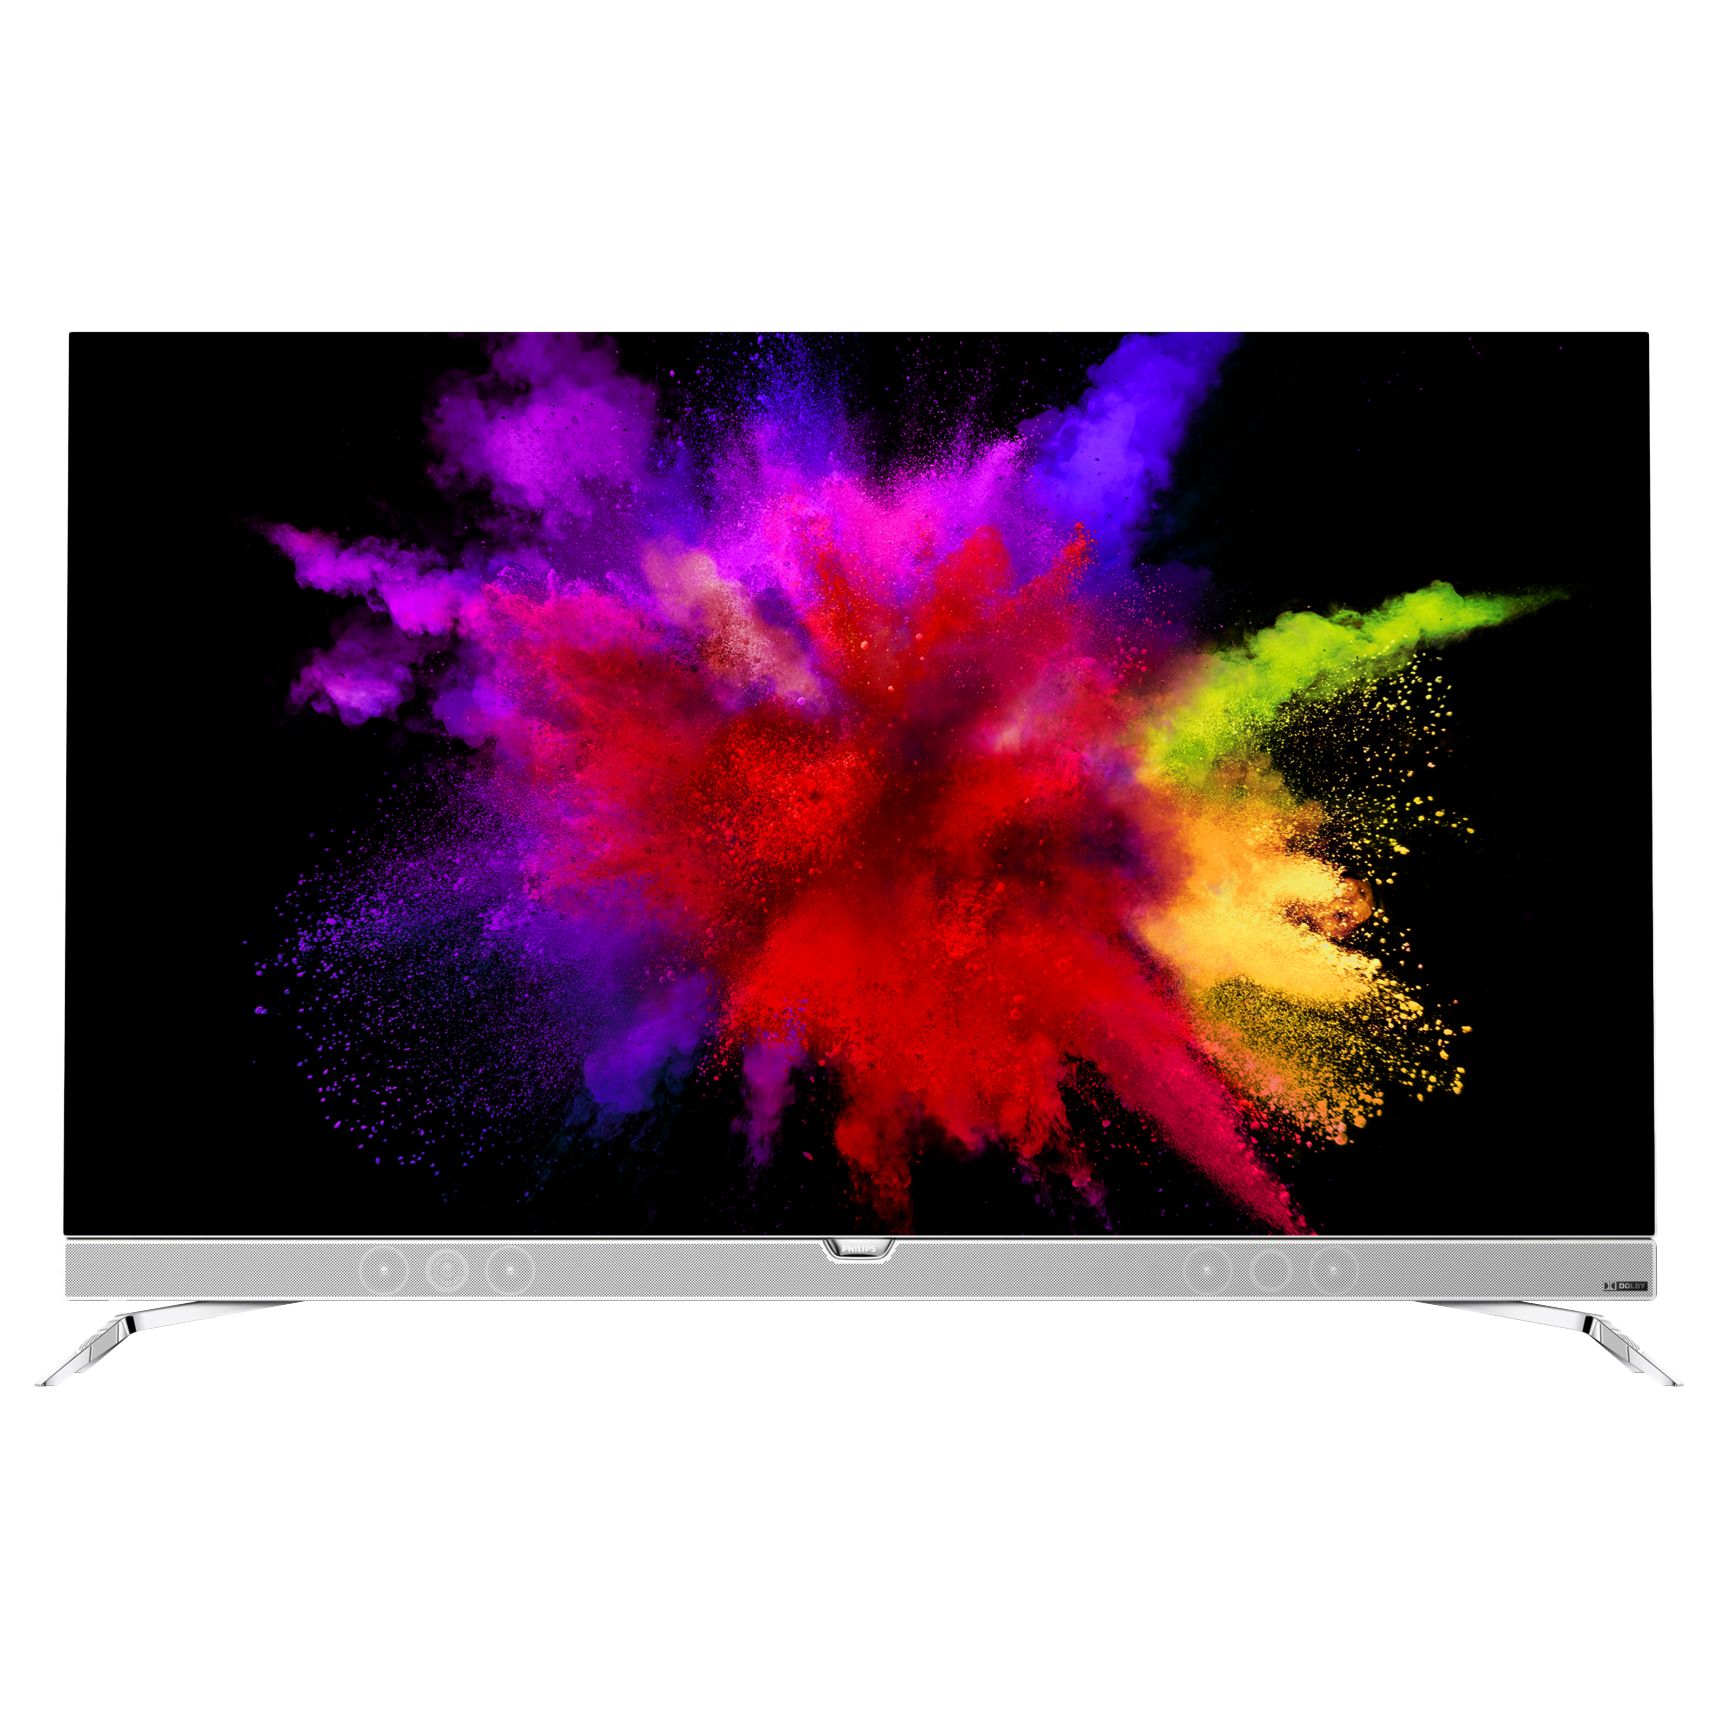 Philips 55pos901 Oled Hdr 4k Ultra Hd Smart Android Tv 55 With Freeview Hd Ambilight 3 Sided Chrome At John Lewis Partners